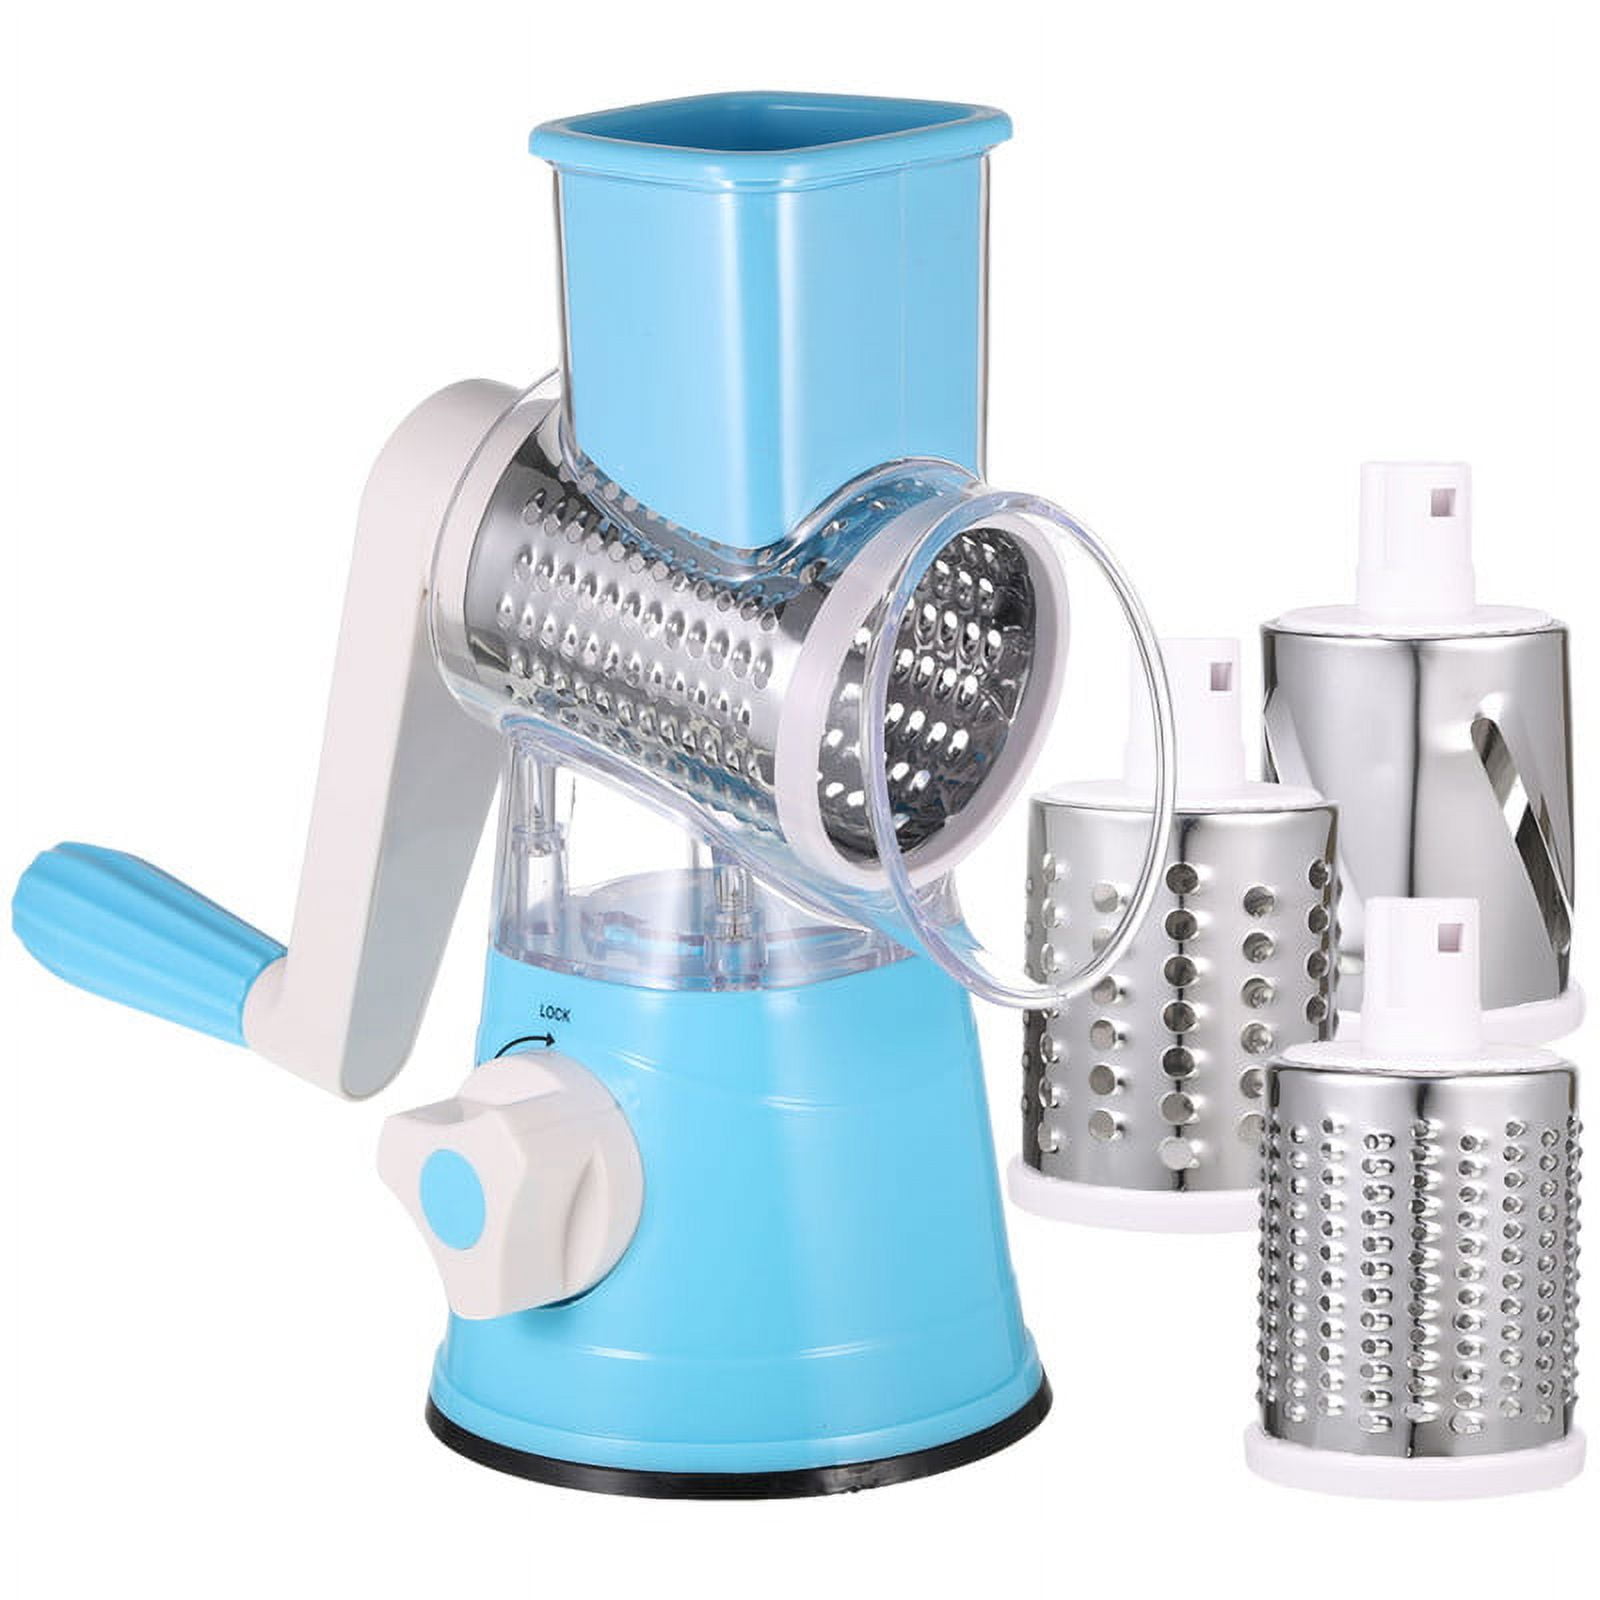 NEW! TURQUOISE STAINLESS STEEL TABLETOP ROTARY DRUM GRATER, SHREDS & SLICES